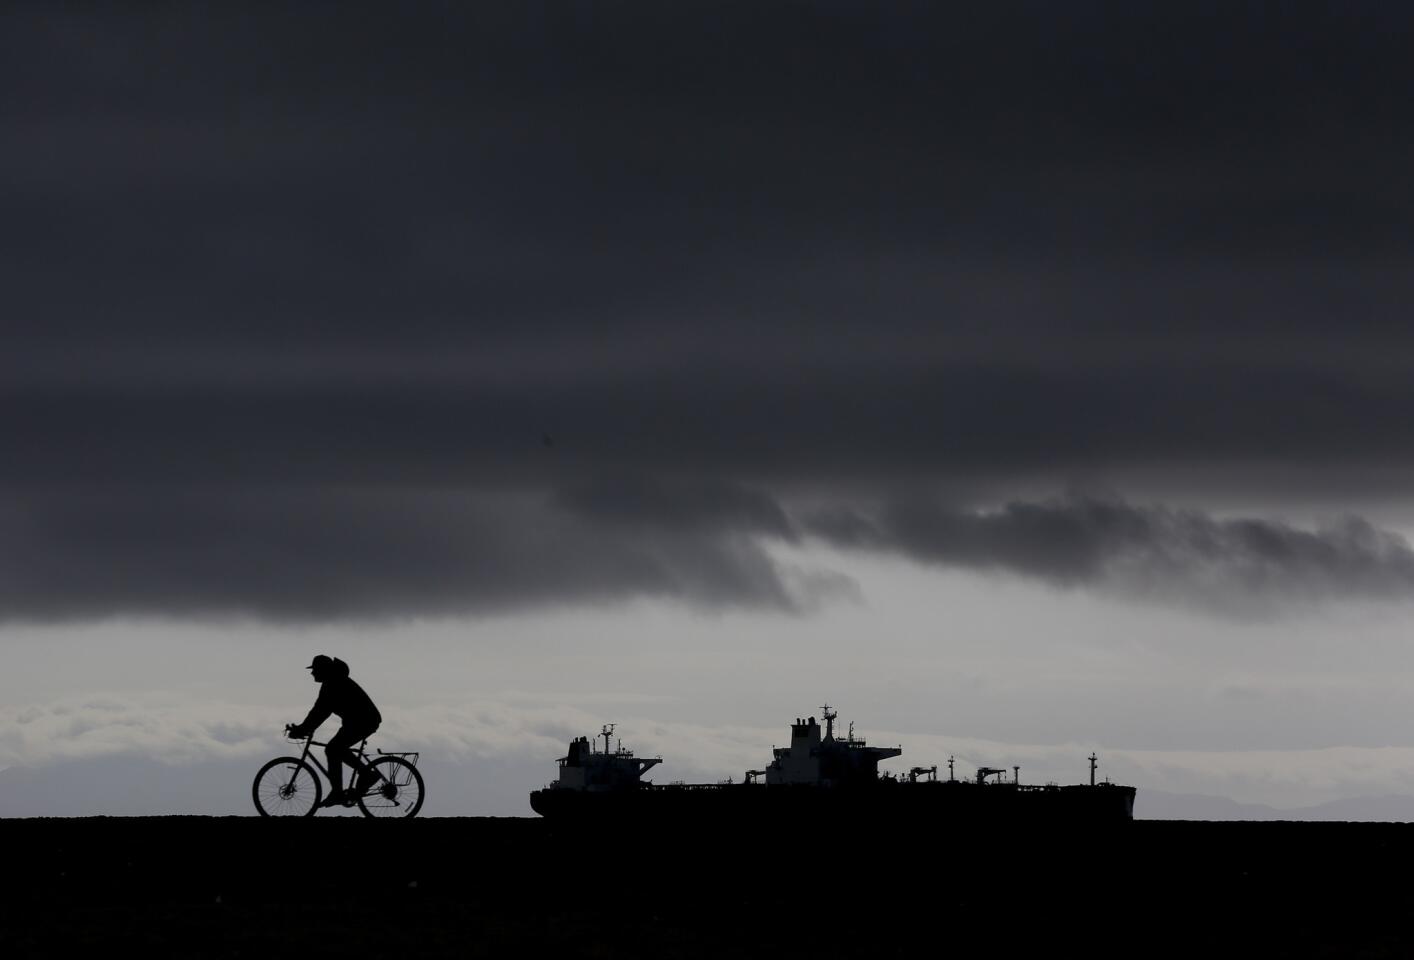 LONG BEACH,CA., FEBRUARY 7, 2017: rides along the boardwalk at Kite Beach in Long Beach after two days of storms brought heavy rains to Southern California.